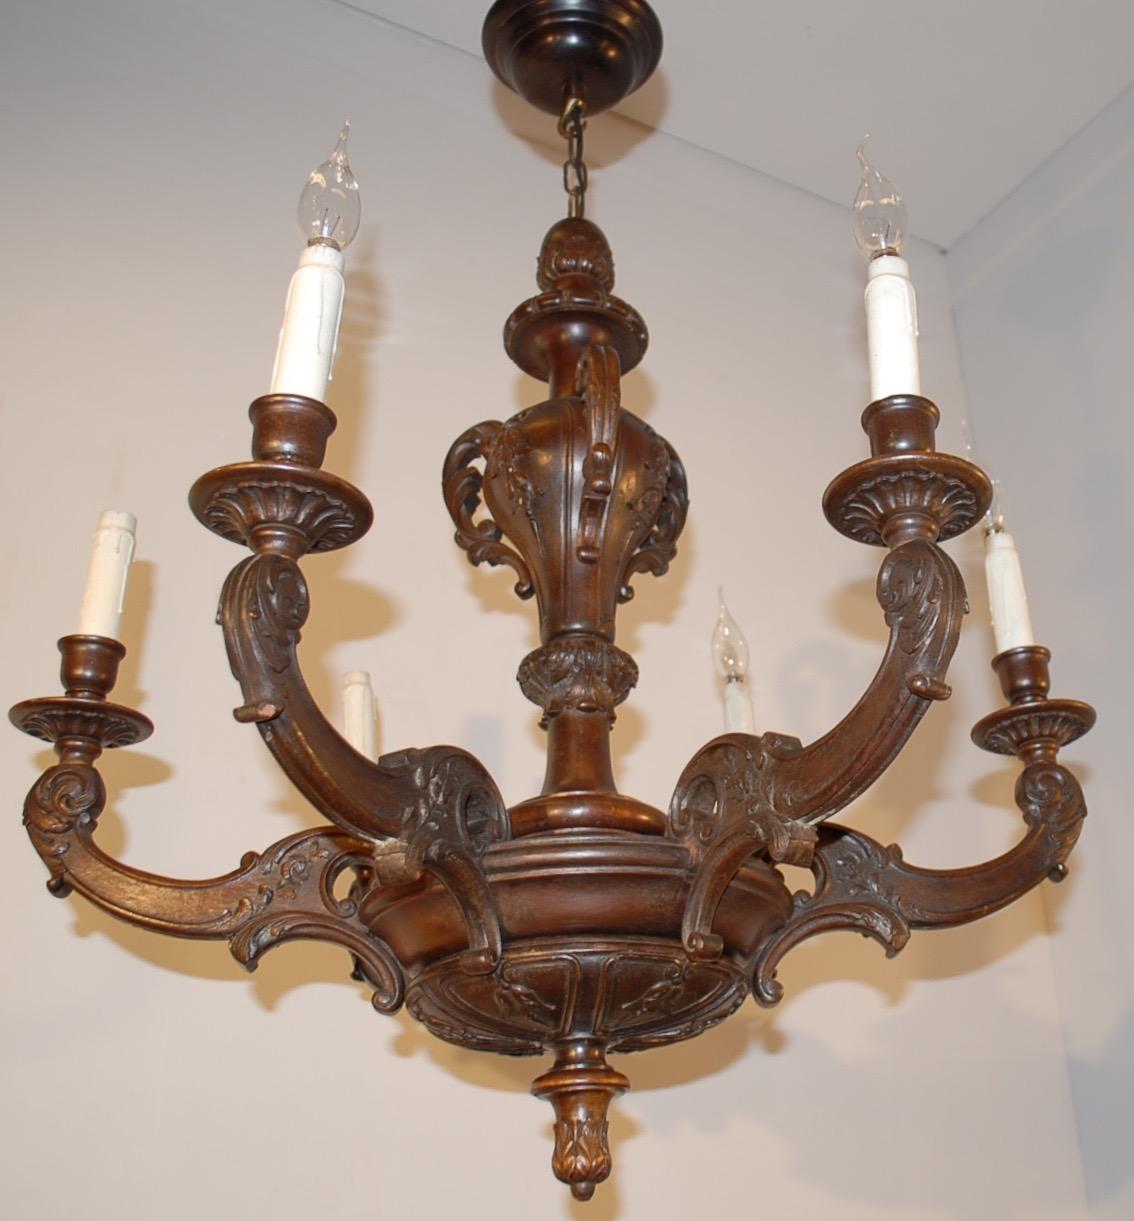 Fabulous Early 1900's Six-Light Quality Carved Nutwood Chandelier Light Fixture For Sale 3